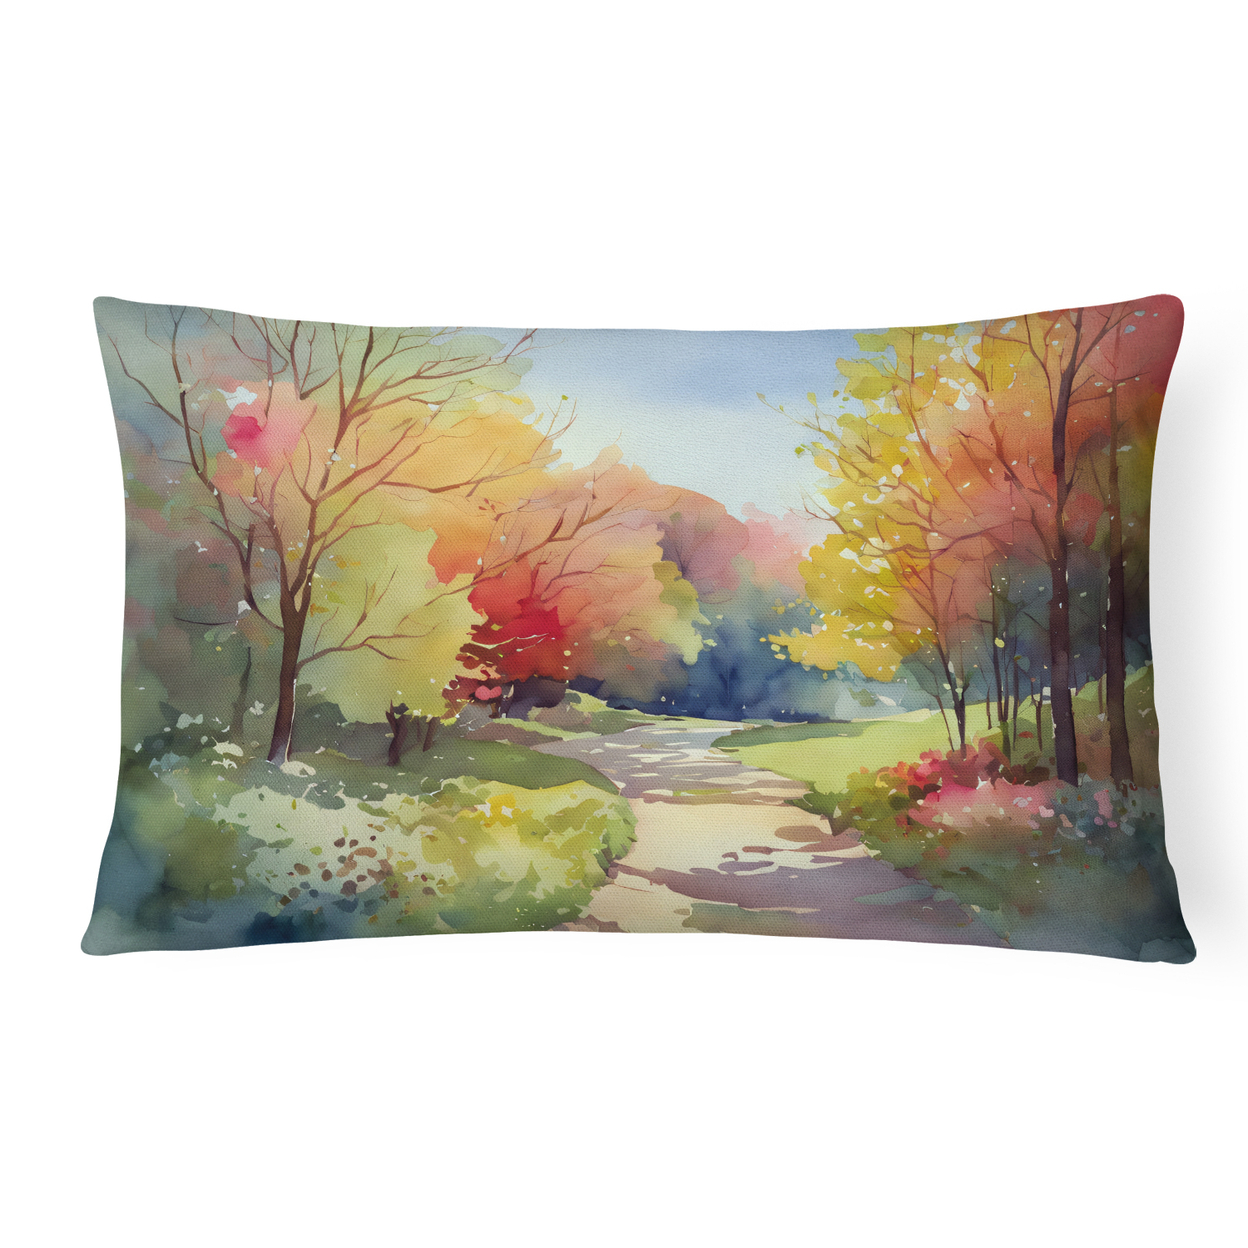 North Carolina Dogwoods in Watercolor Fabric Decorative Pillow - image 1 of 4